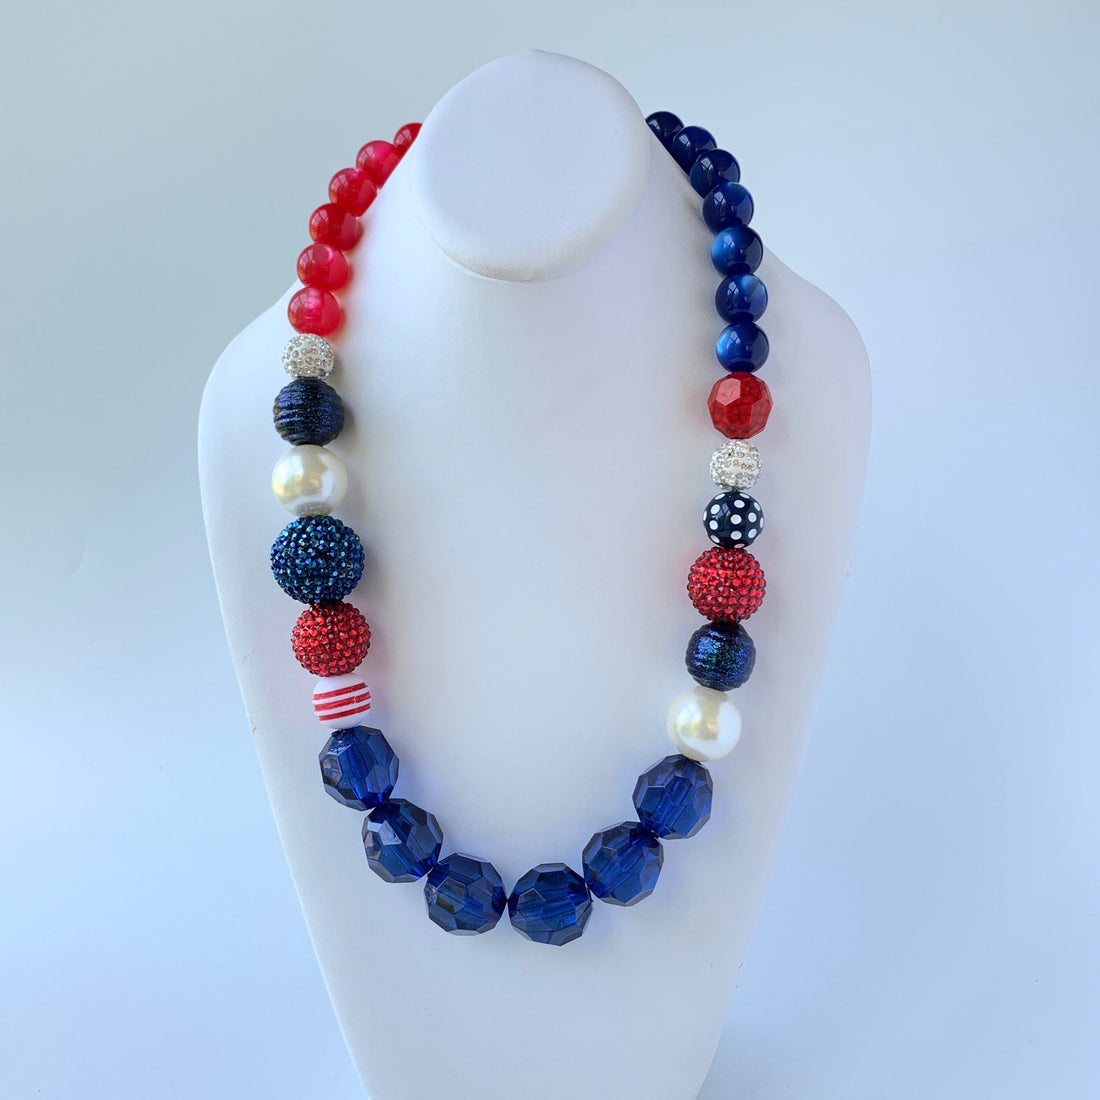 Lenora Dame Independence Day Queen Mum Statement Necklace